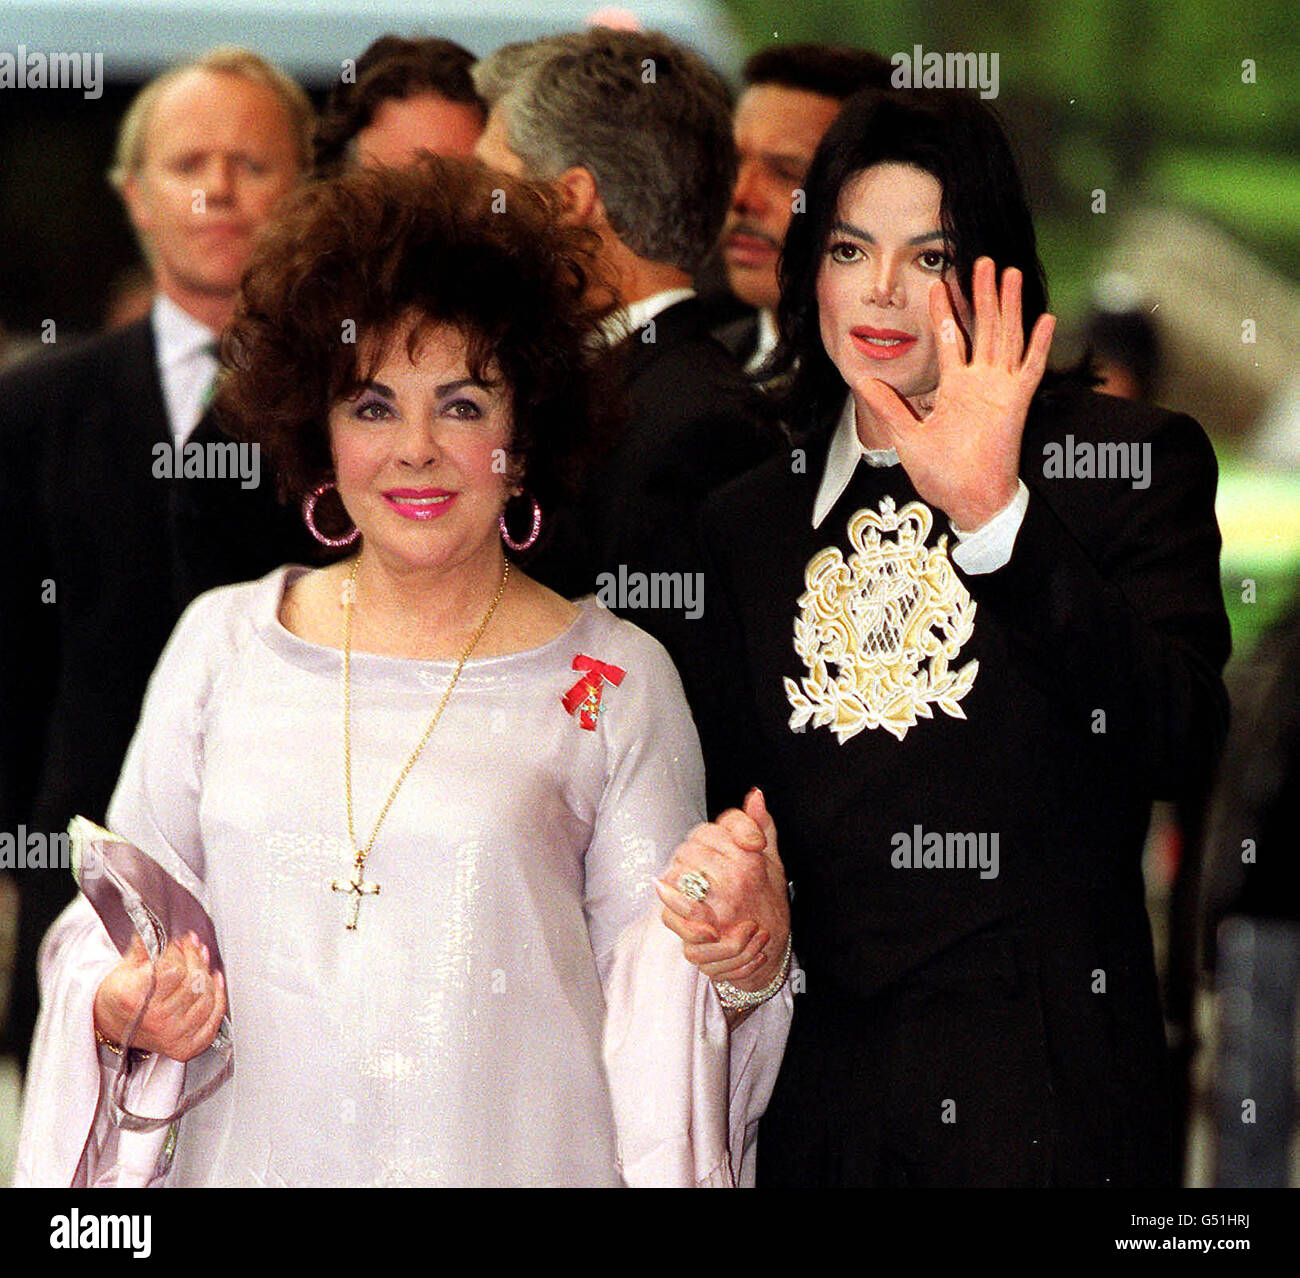 Dame Elizabeth Taylor, accompanied by American pop singer Michael Jackson, attend a gala charity concert honouring the career, life and fundraising achievement of Ms Taylor, at the Royal Albert Hall in London. * 8/1/2001: US singer Michael Jackson who is to record and tour again this year with a reunited Jackson 5, his brother Jermaine has claimed in a radio interview it was reported. Jermaine told Sirius Satellite Radio in Las Vegas that the legendary soul group would play together for the first time since 1984. Stock Photo